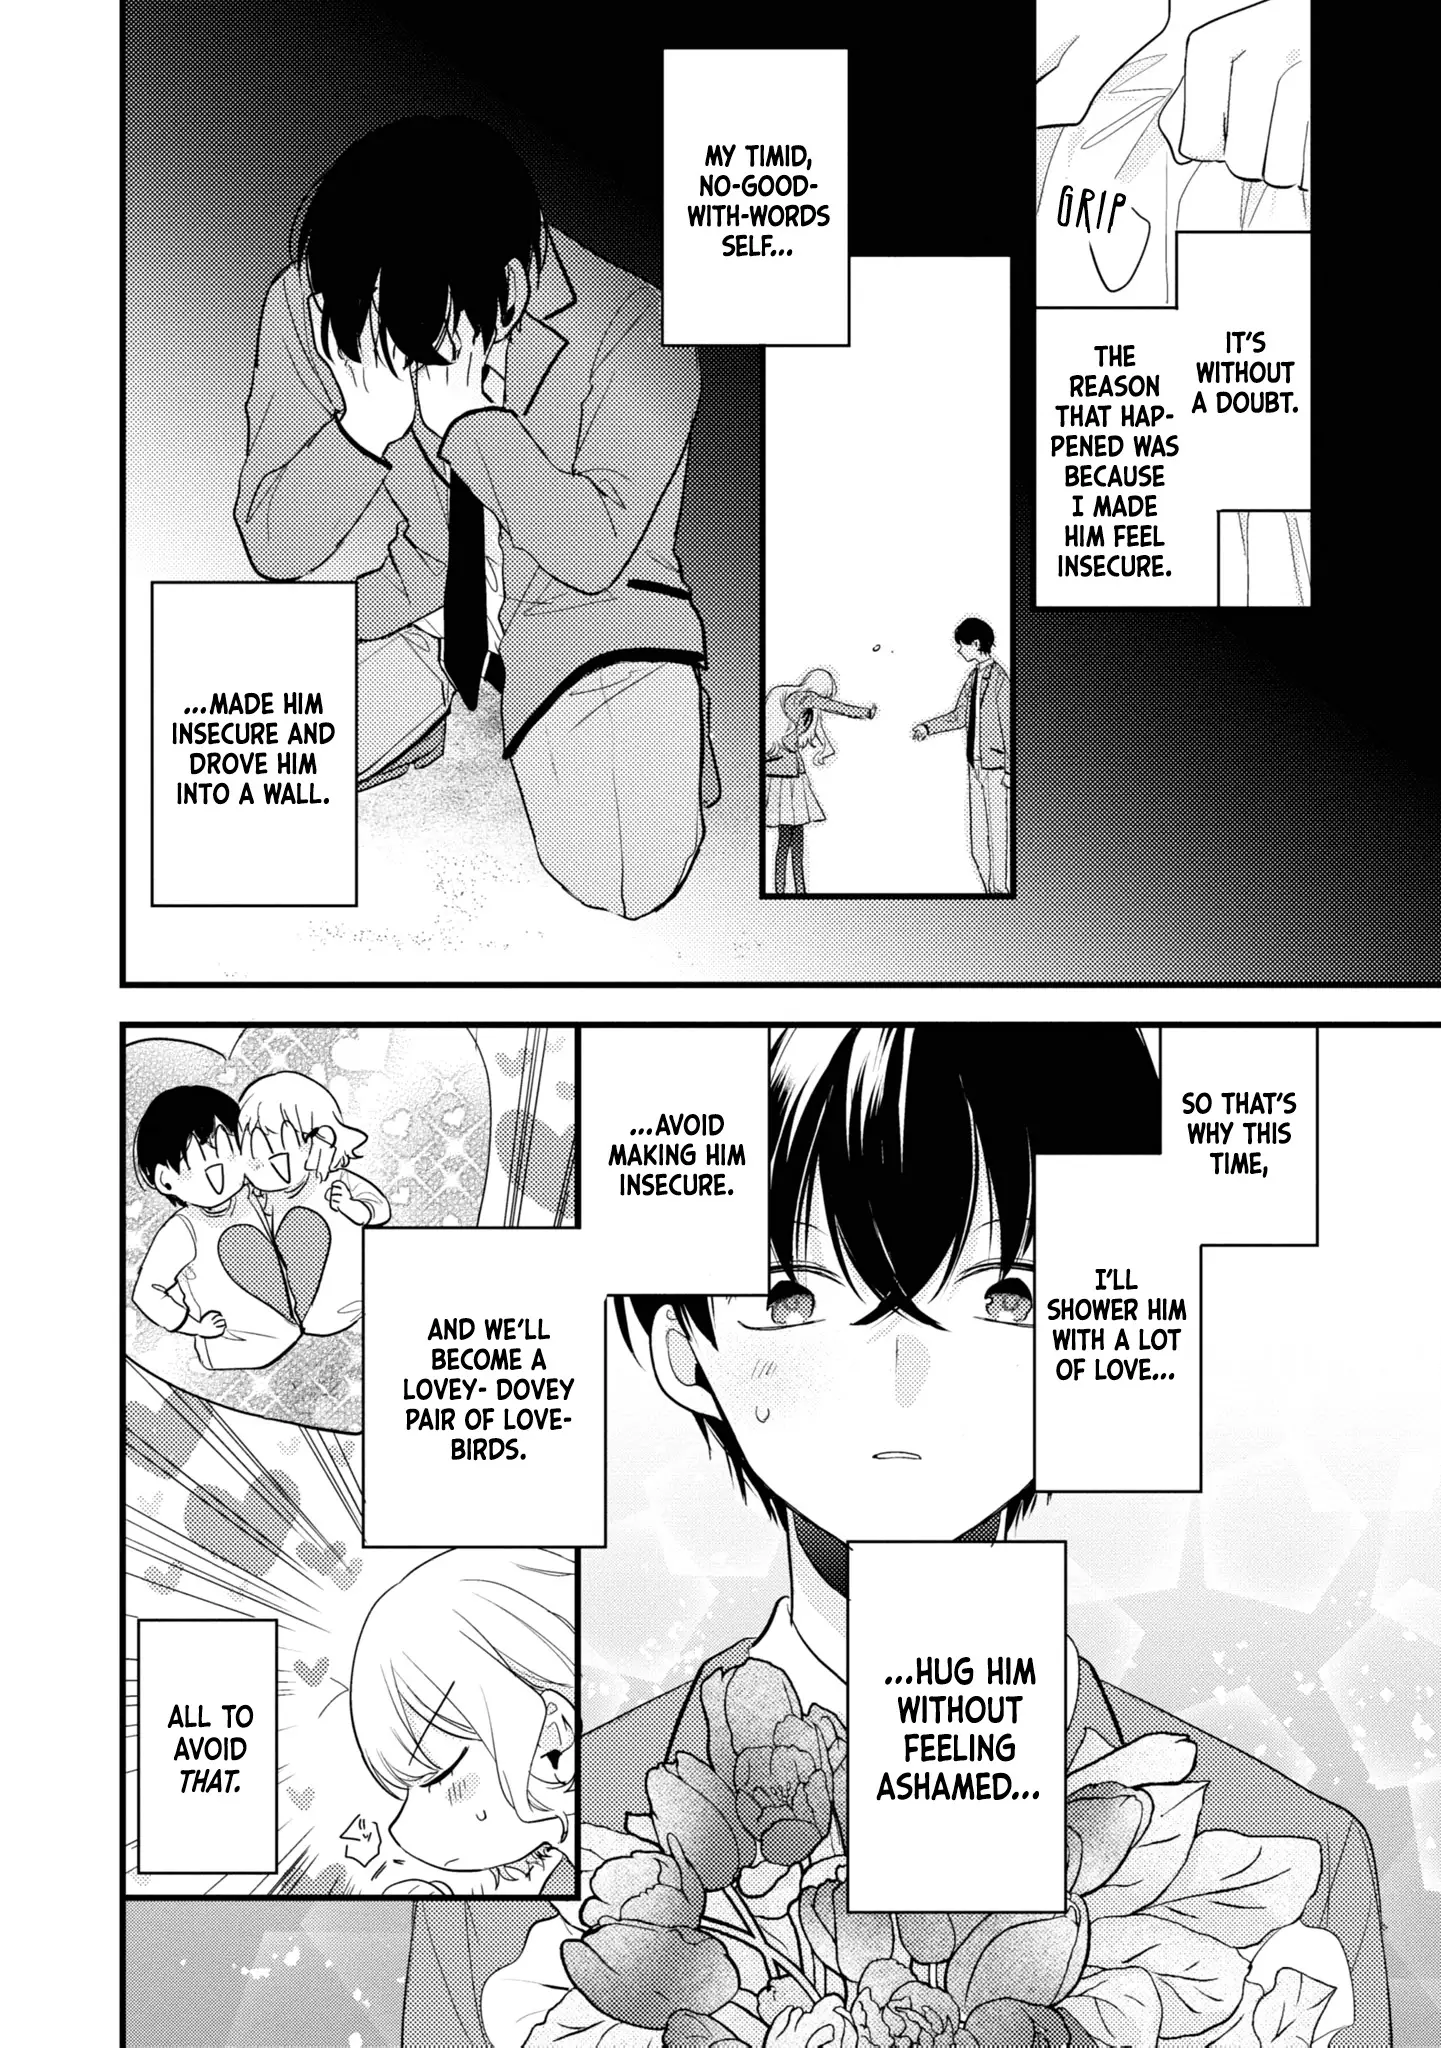 I Have A Second Chance At Life, So I’Ll Pamper My Yandere Boyfriend For A Happy Ending!! - 2 page 3-c0c1d965